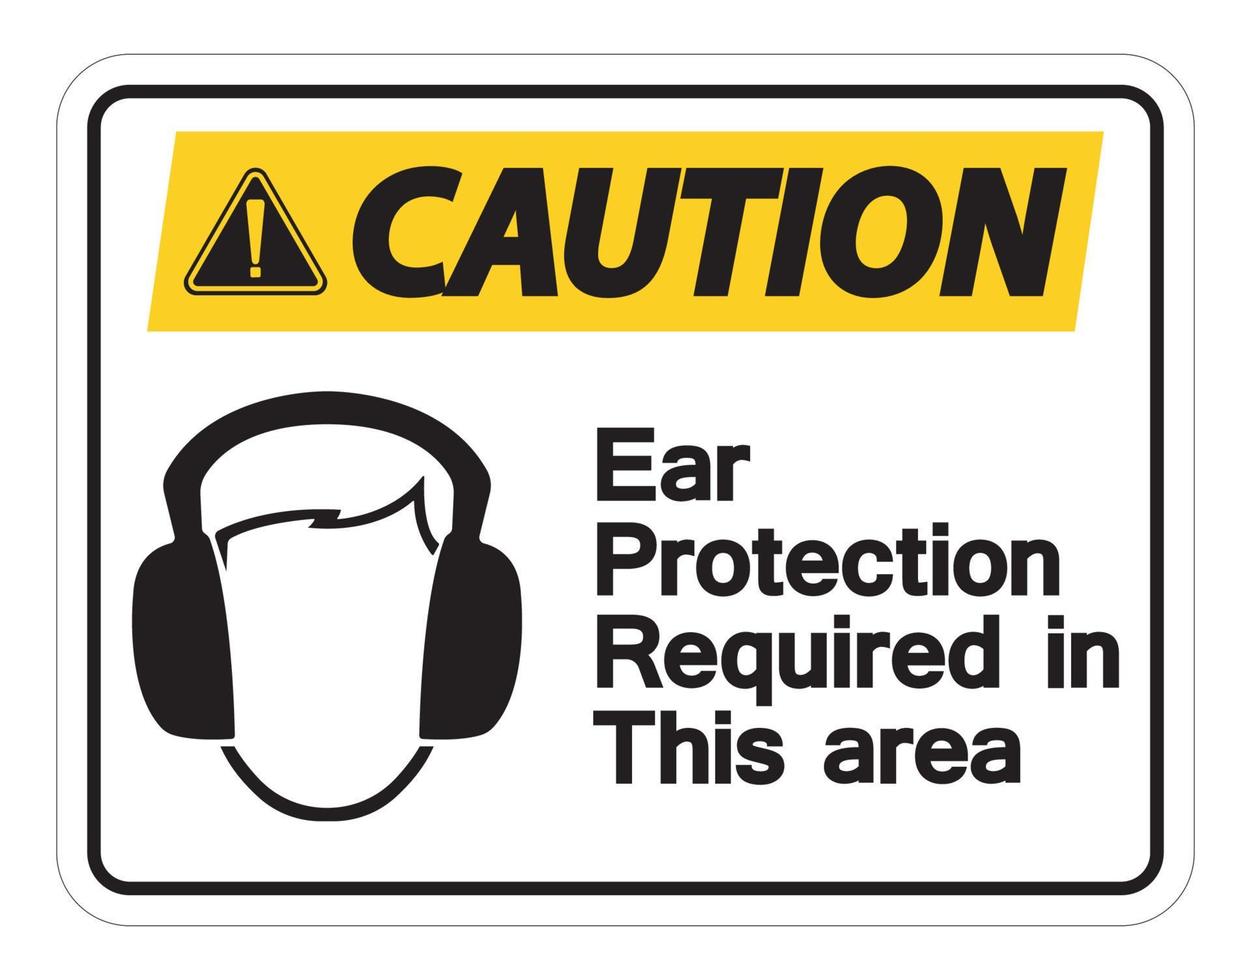 Caution Ear Protection Required In This Area Symbol Sign on white background,Vector Illustration vector